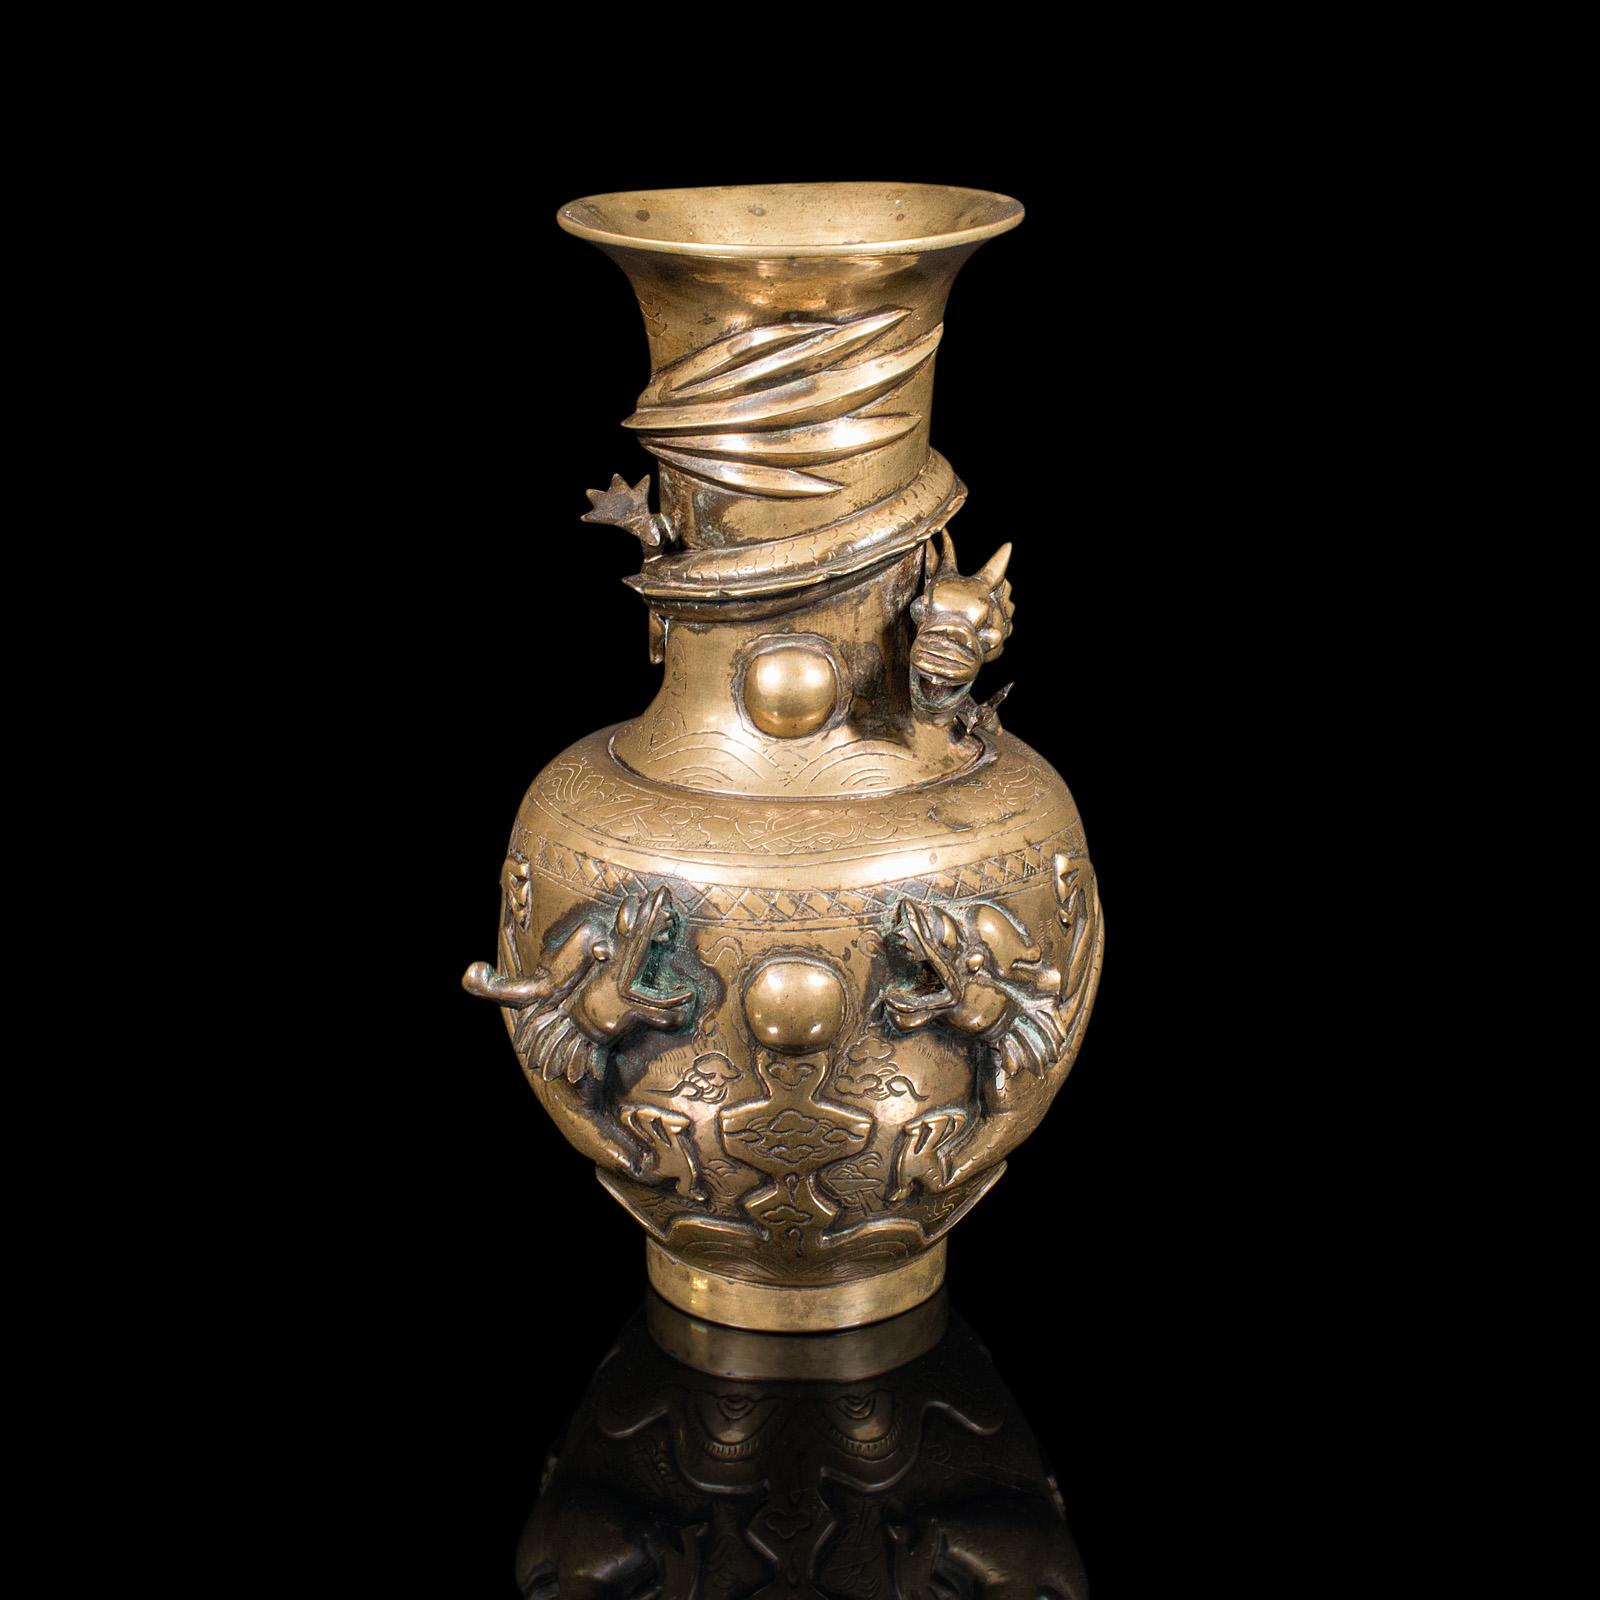 This is an antique decorative vase. A Chinese, brass flower urn with dragon motif, dating to the Victorian period, circa 1880.

Wonderful relief form with appealing colour
Displays a desirable aged patina - minor loss to one foot
Brass urn form